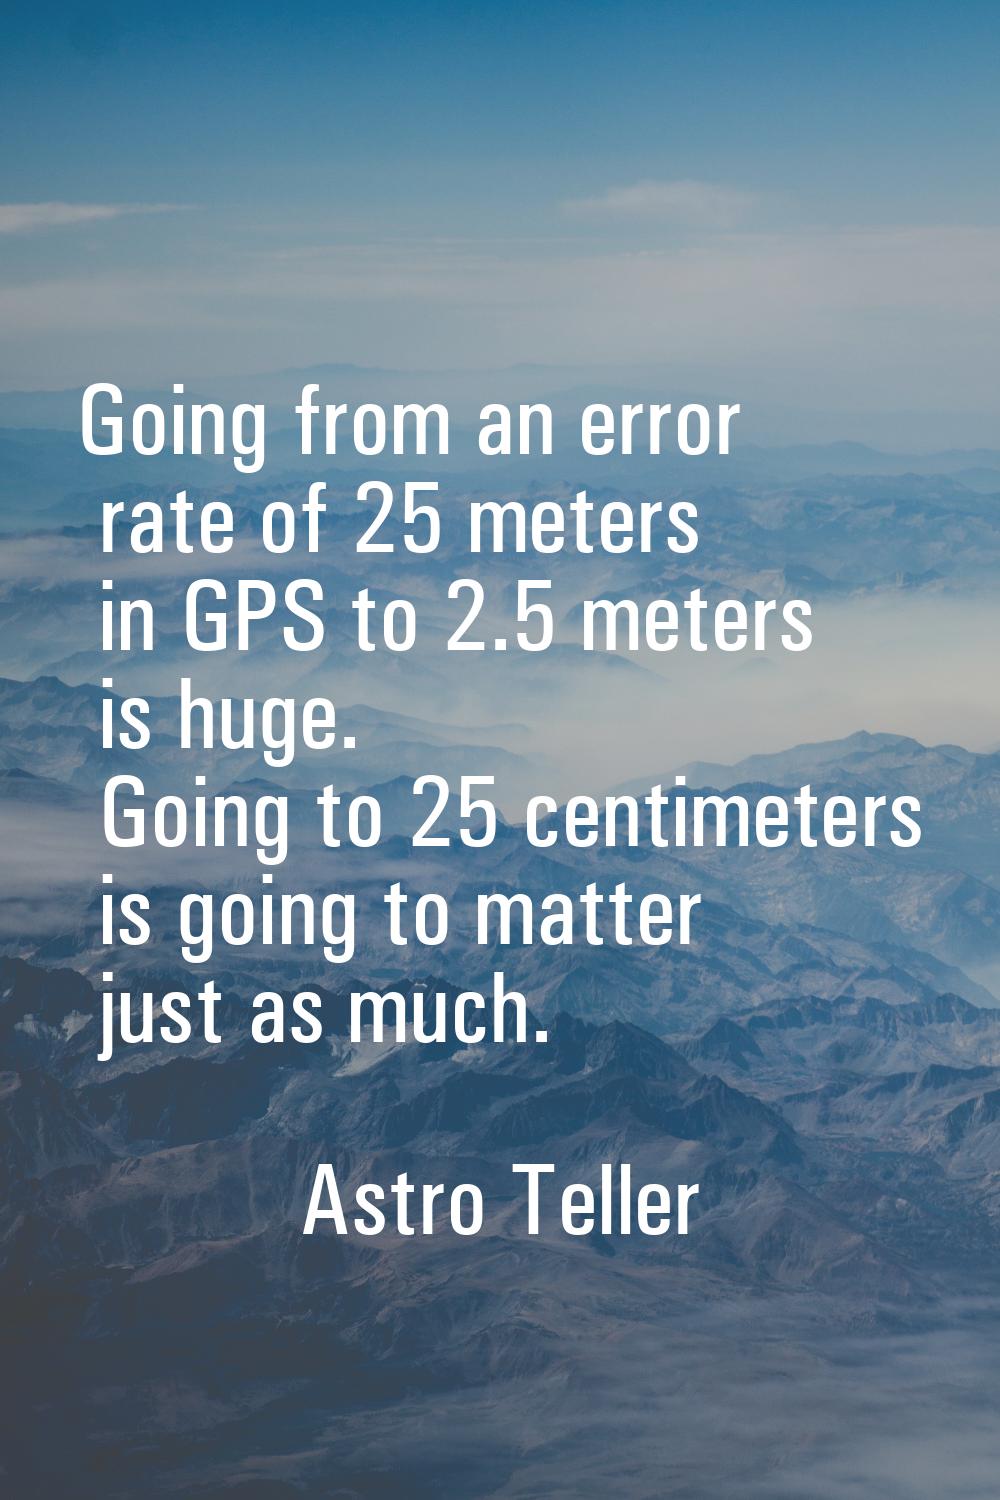 Going from an error rate of 25 meters in GPS to 2.5 meters is huge. Going to 25 centimeters is goin